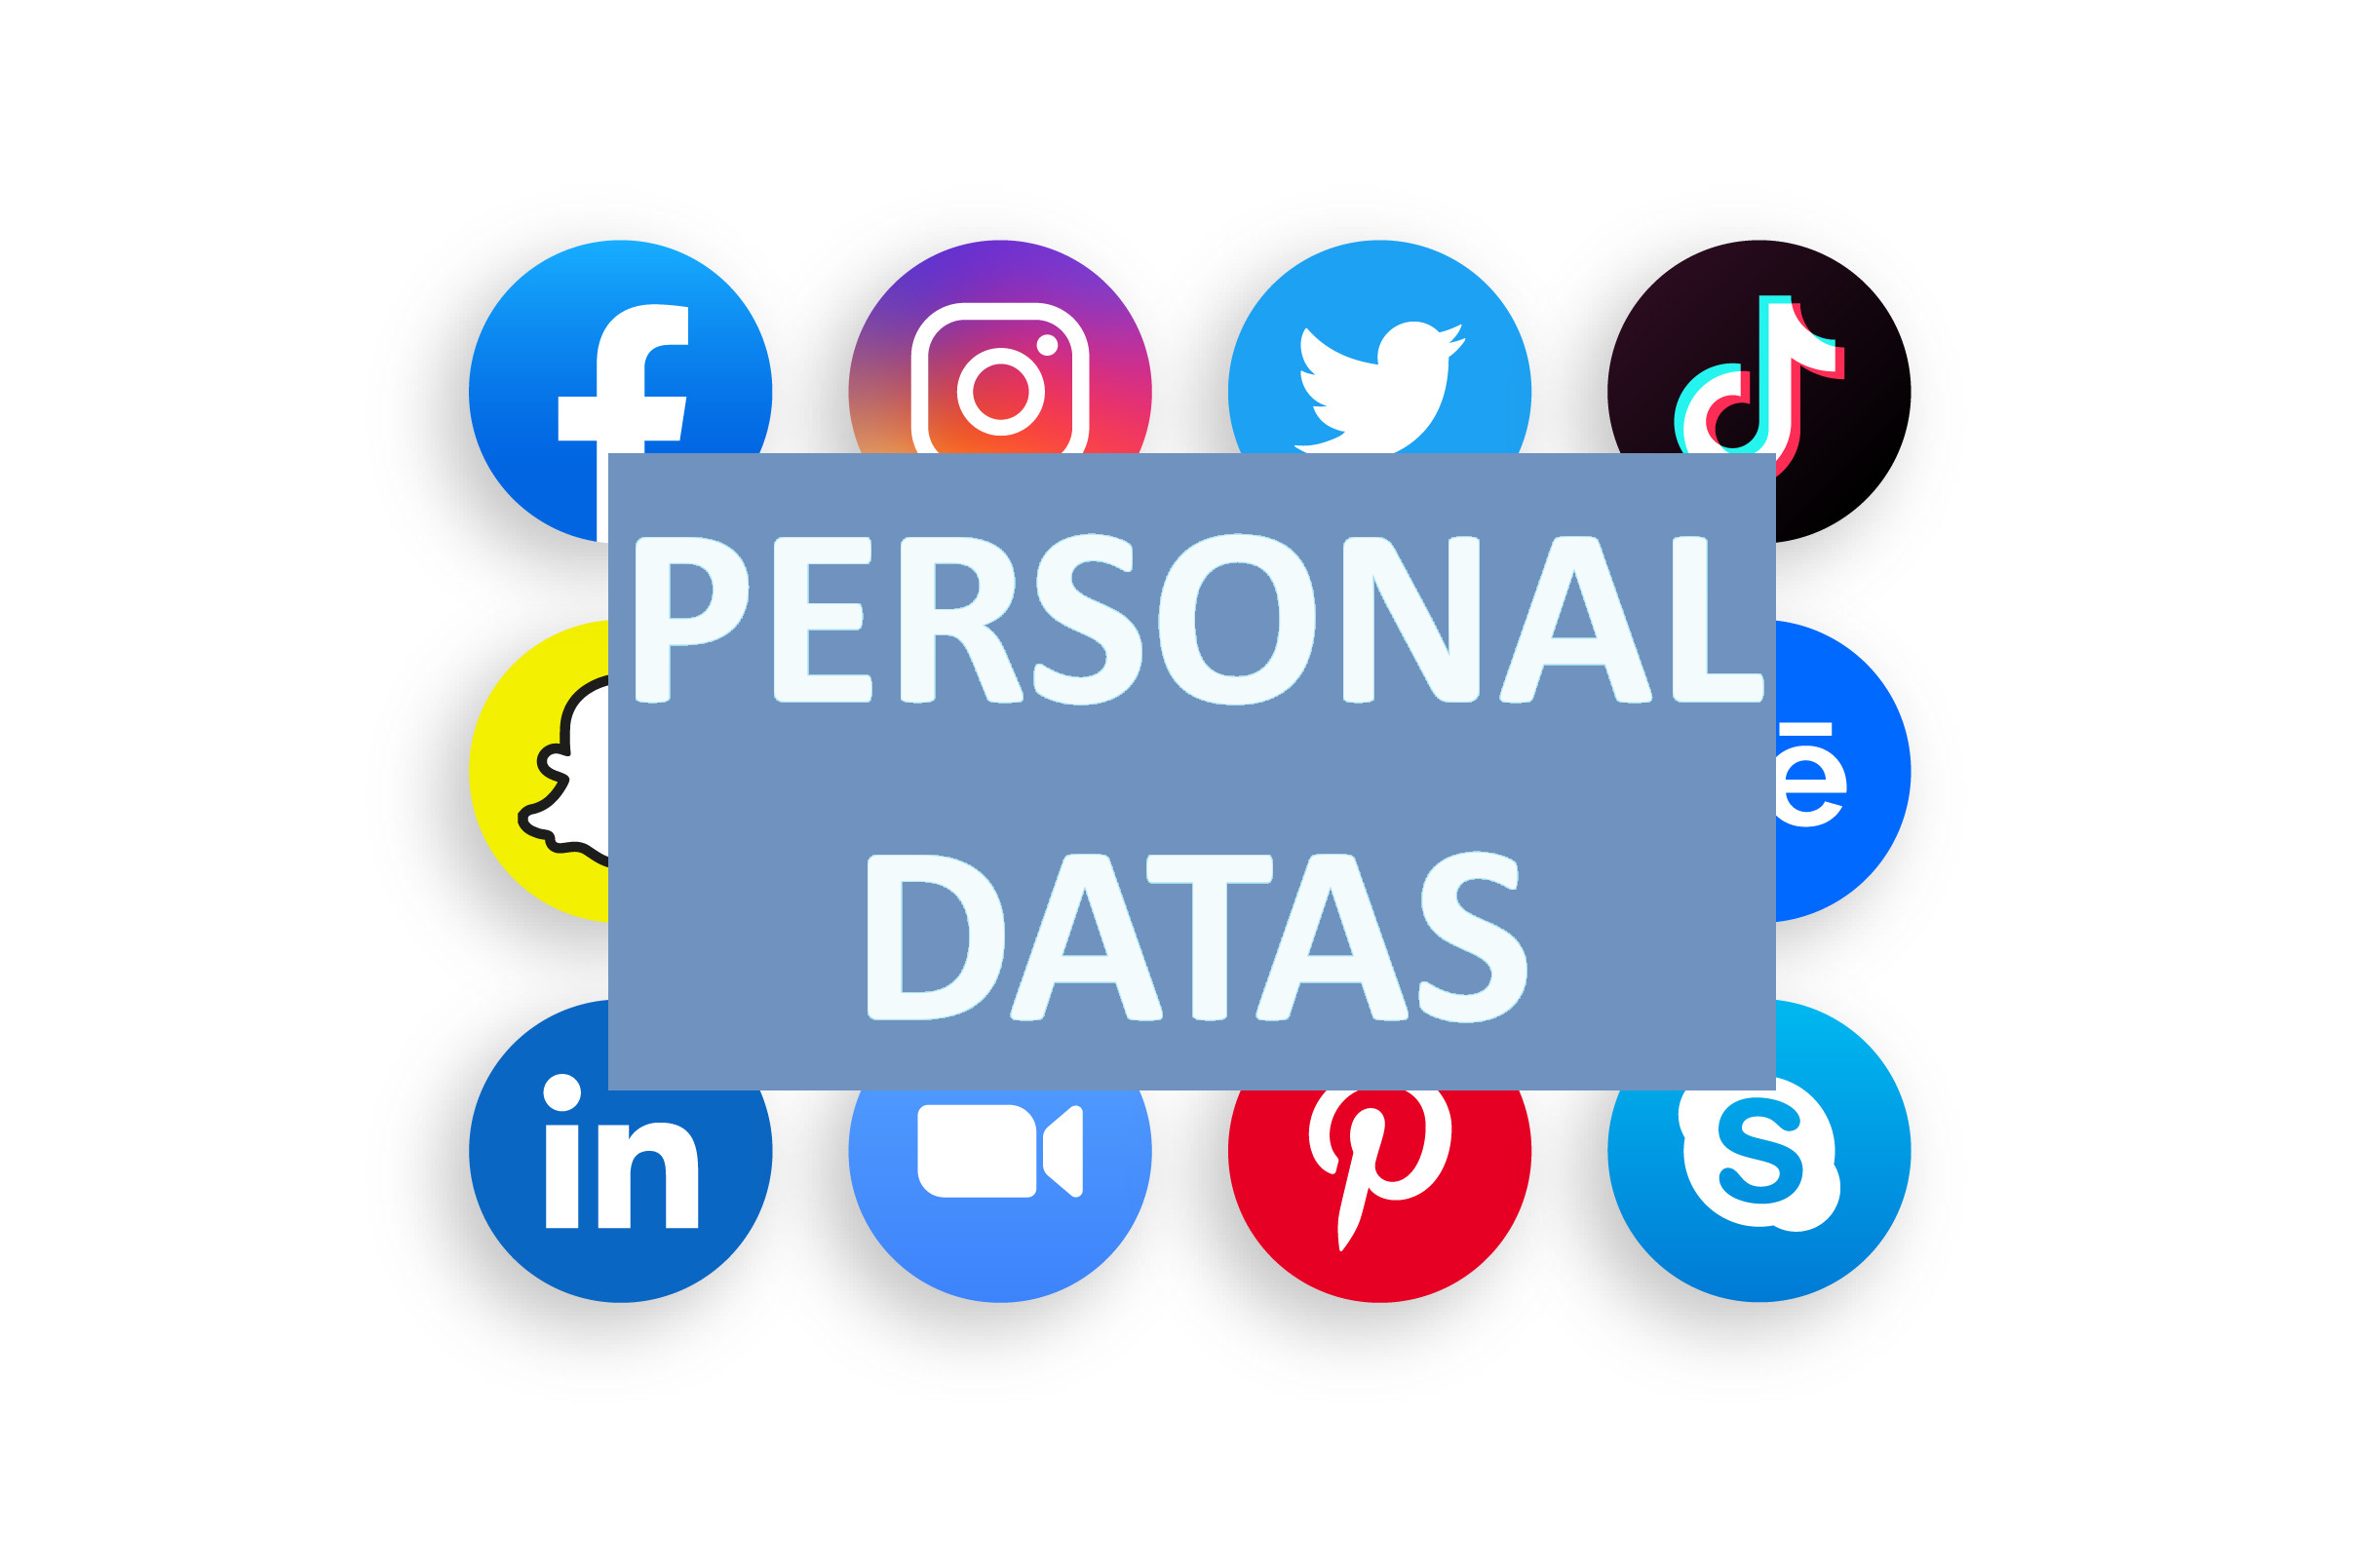 Social medias are your main sources of data